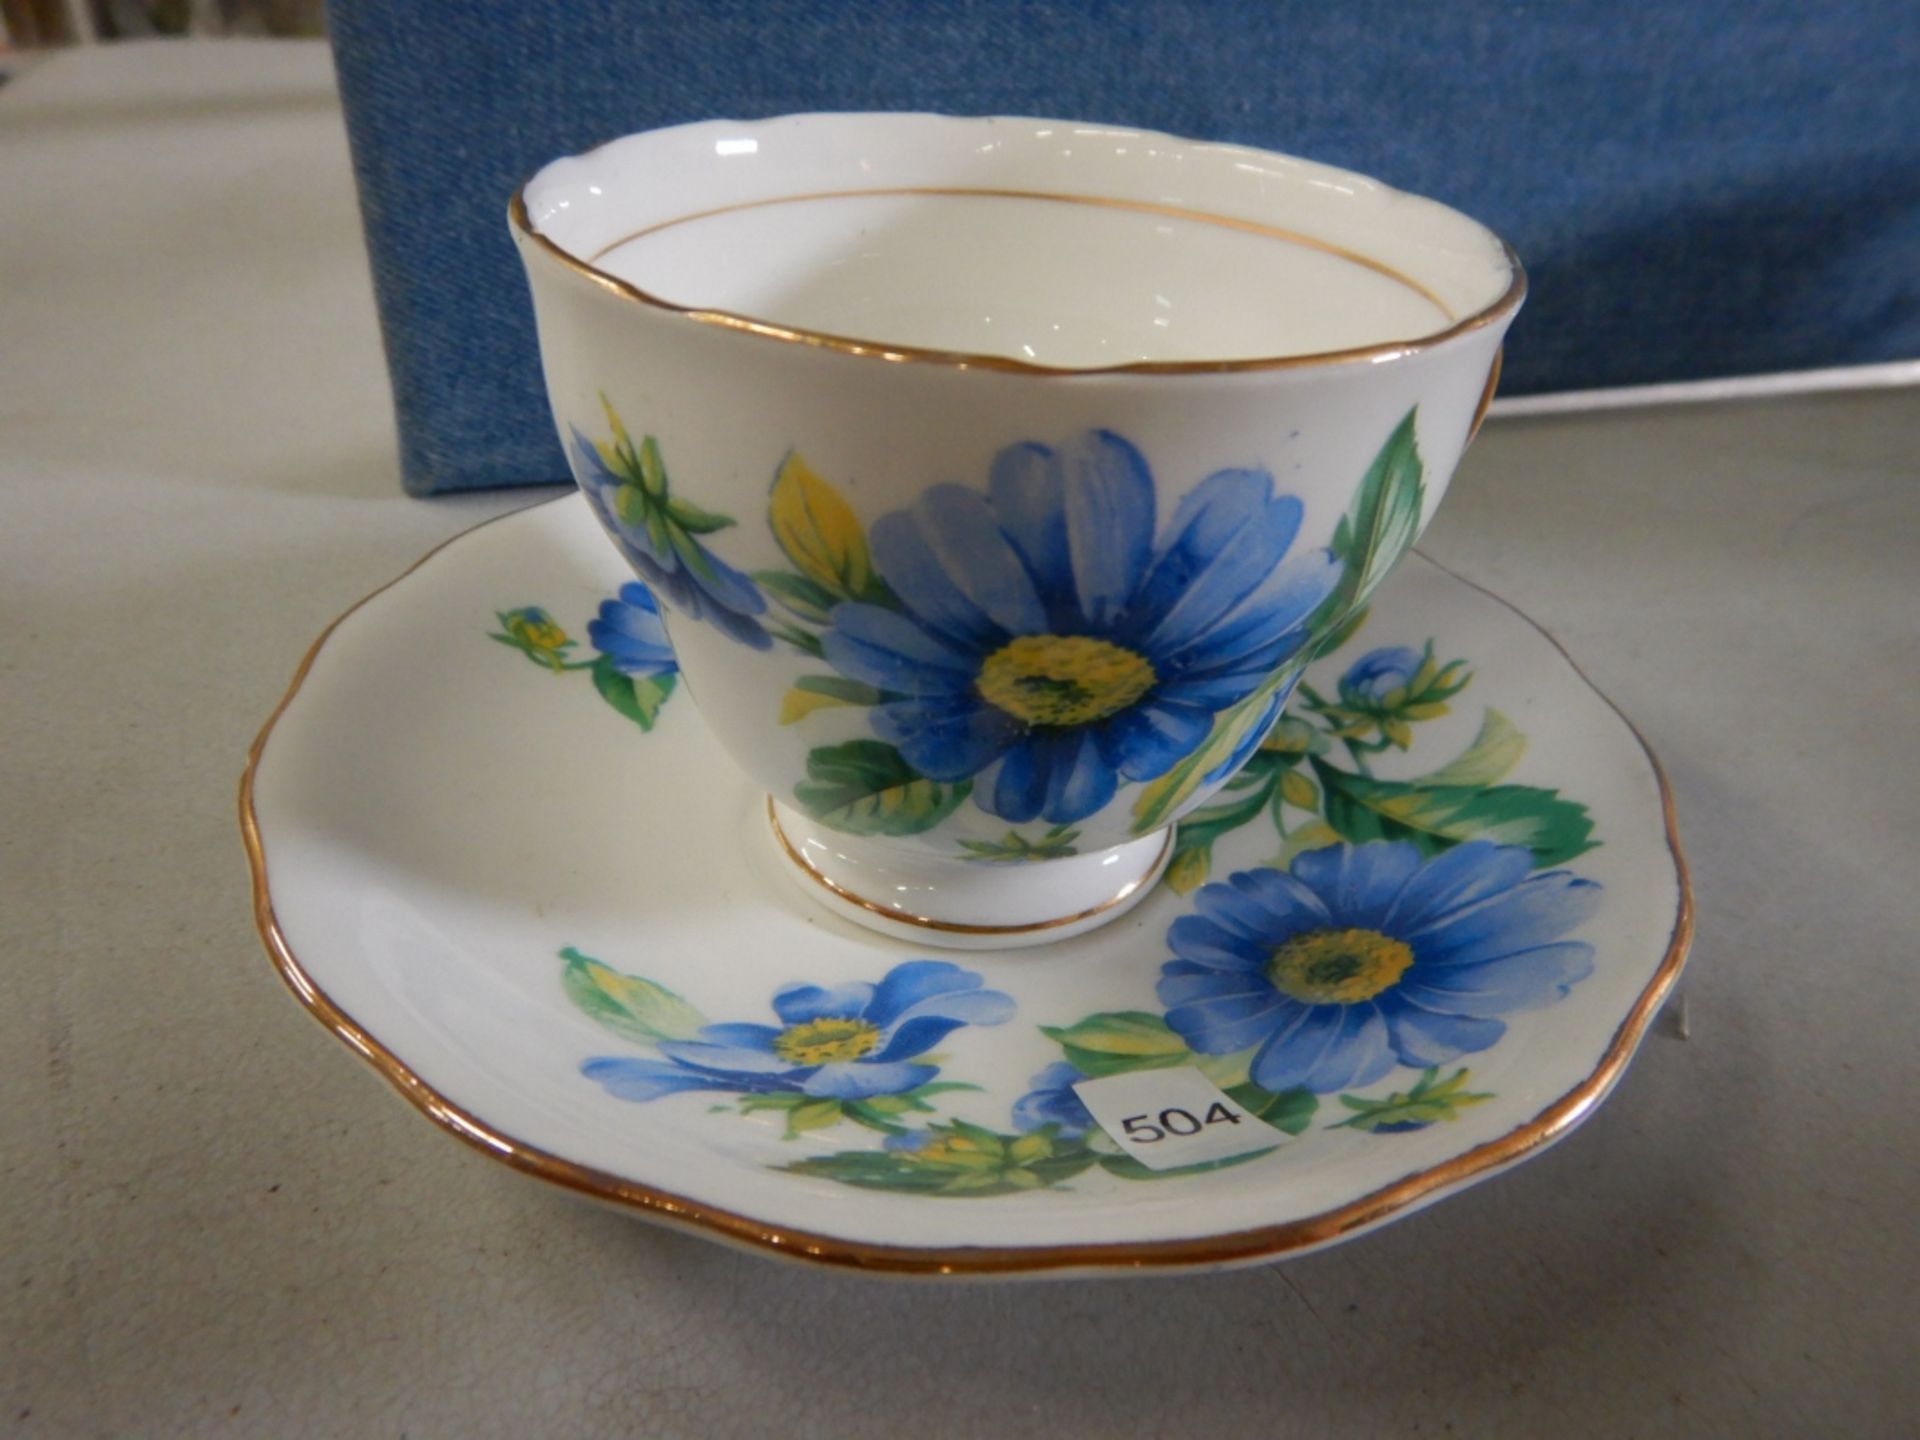 ANTIQUE TEACUPS & SAUCERS - MADE IN ENGLAND - LOT OF 7 - BONE CHINA #8273 - YELLOW FLOWERS, # - Image 7 of 33